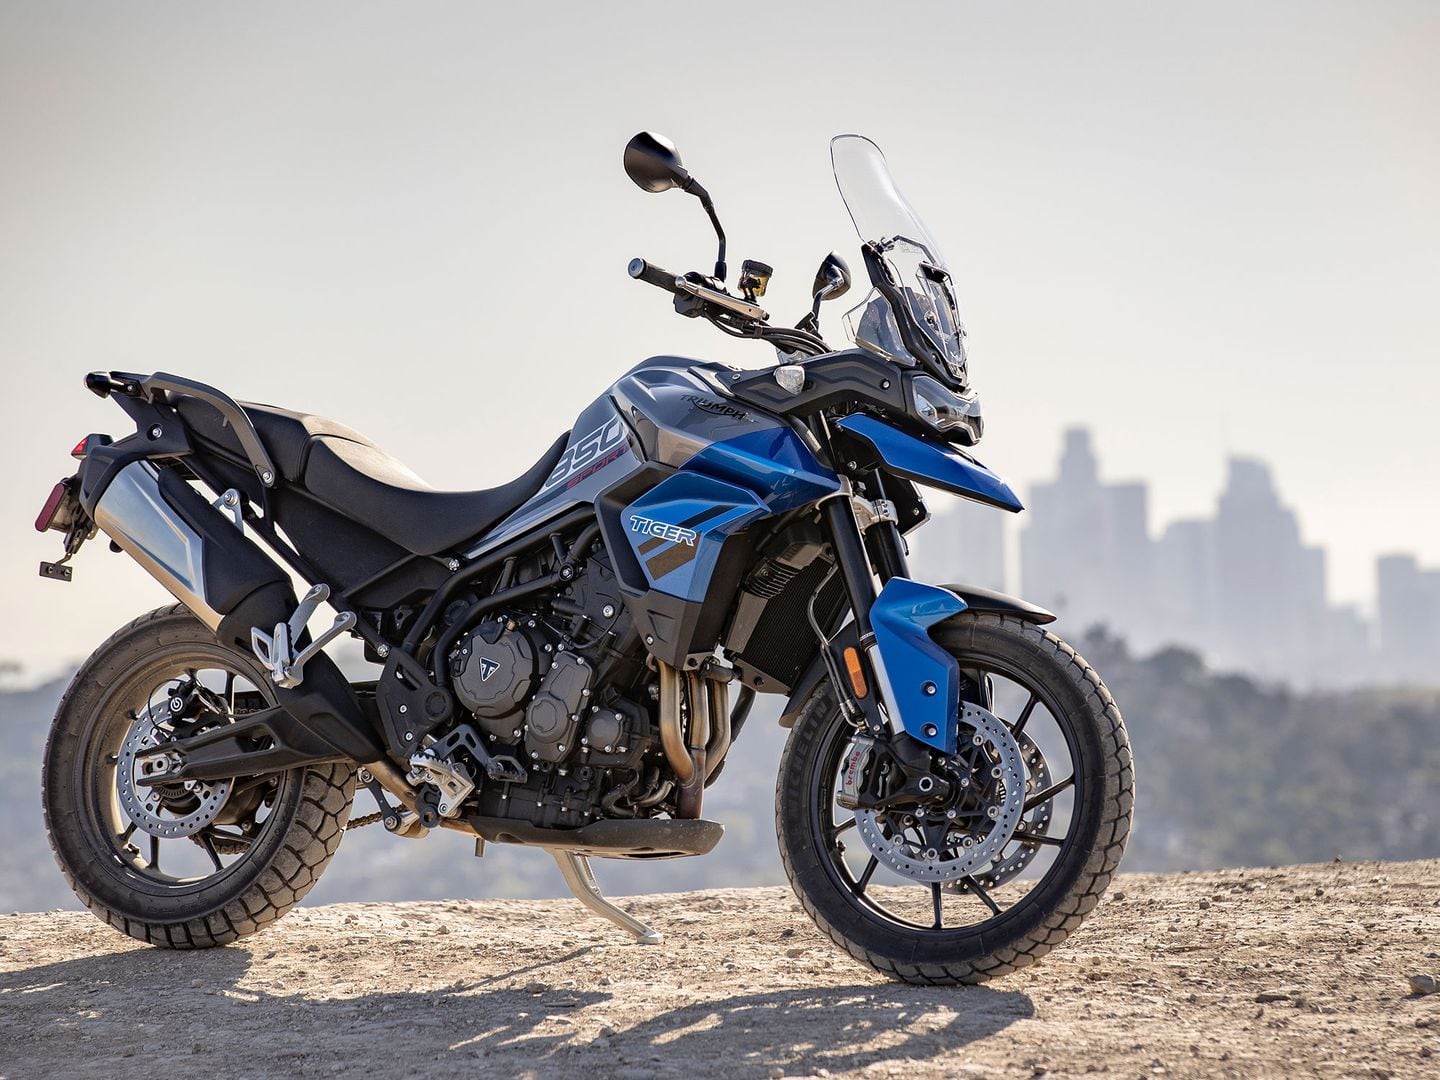 2021 Triumph Tiger 850 Sport Review Cycle World